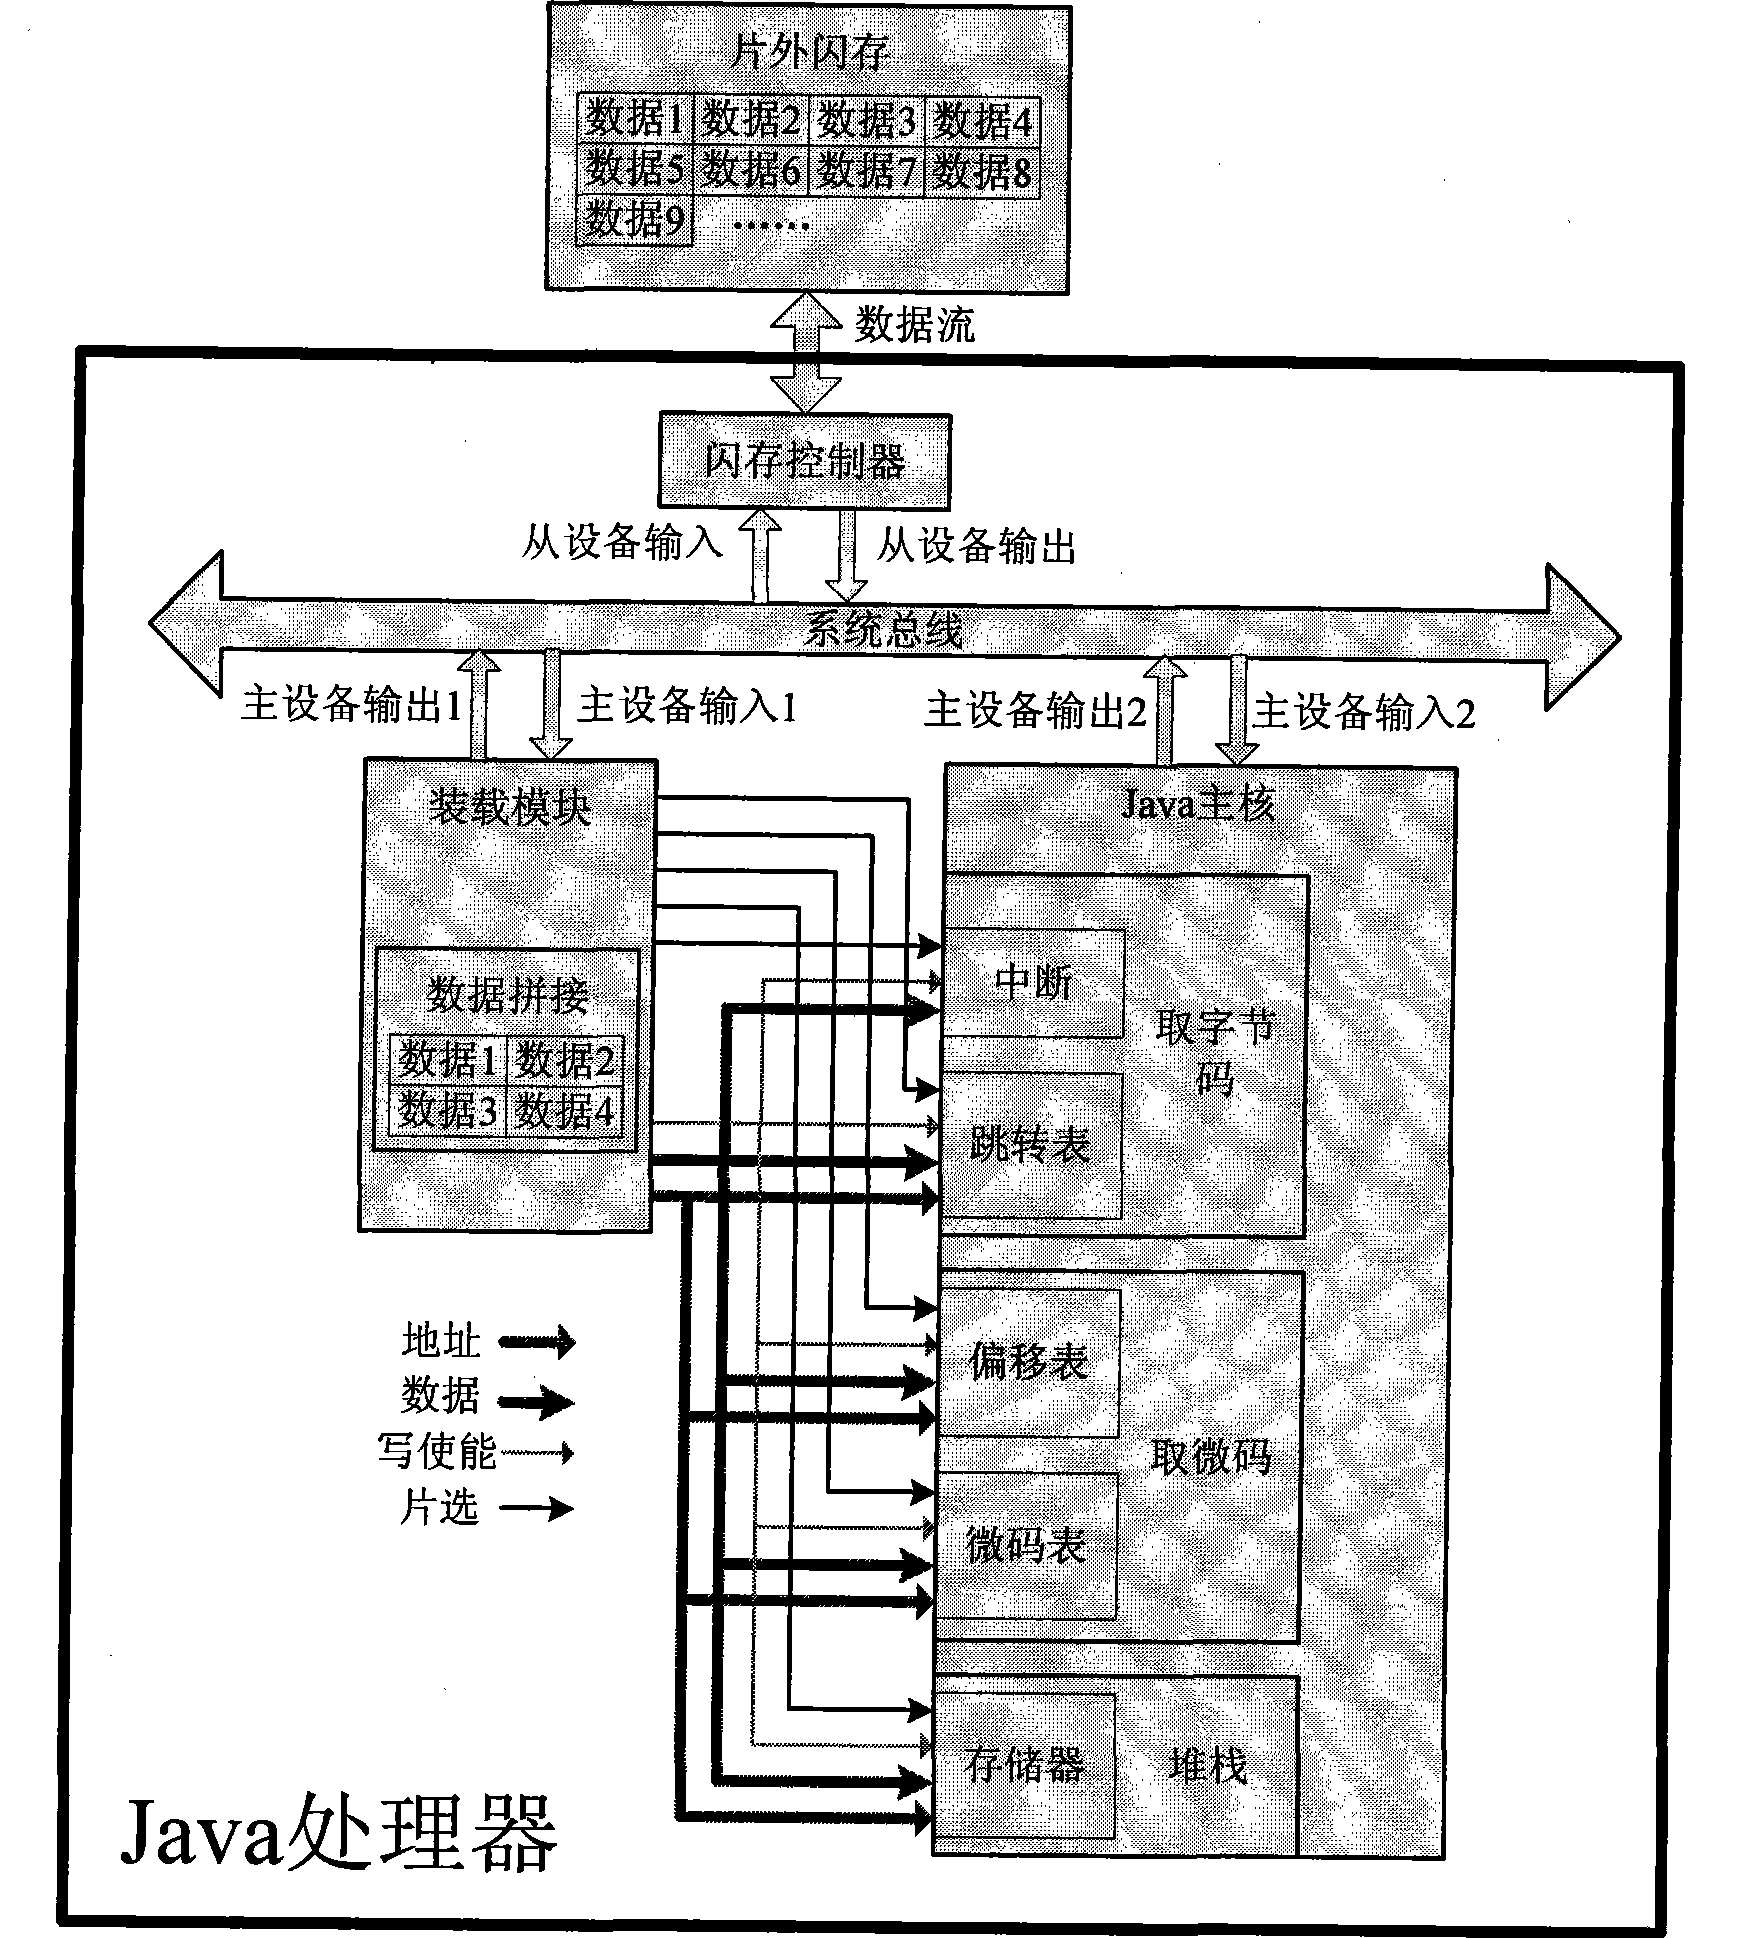 Method for dynamically loading embedded type Java processor microcode instruction set